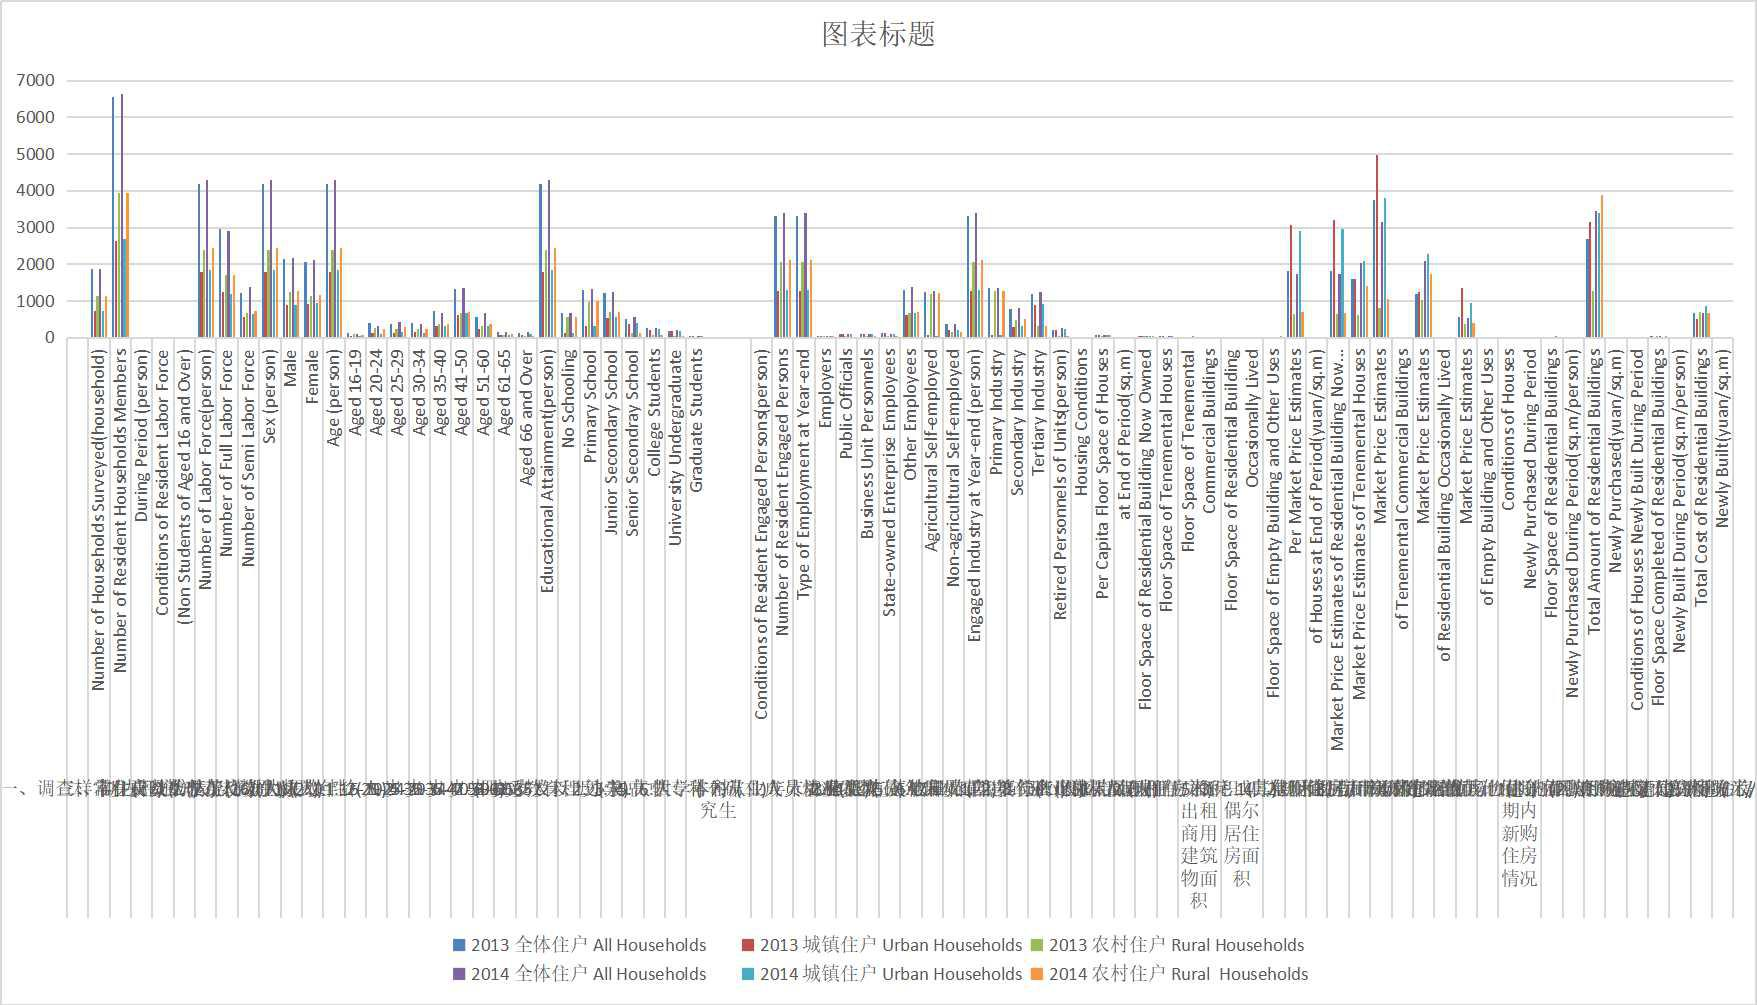 Basic situation of households in Qinghai Province (2013-2020)